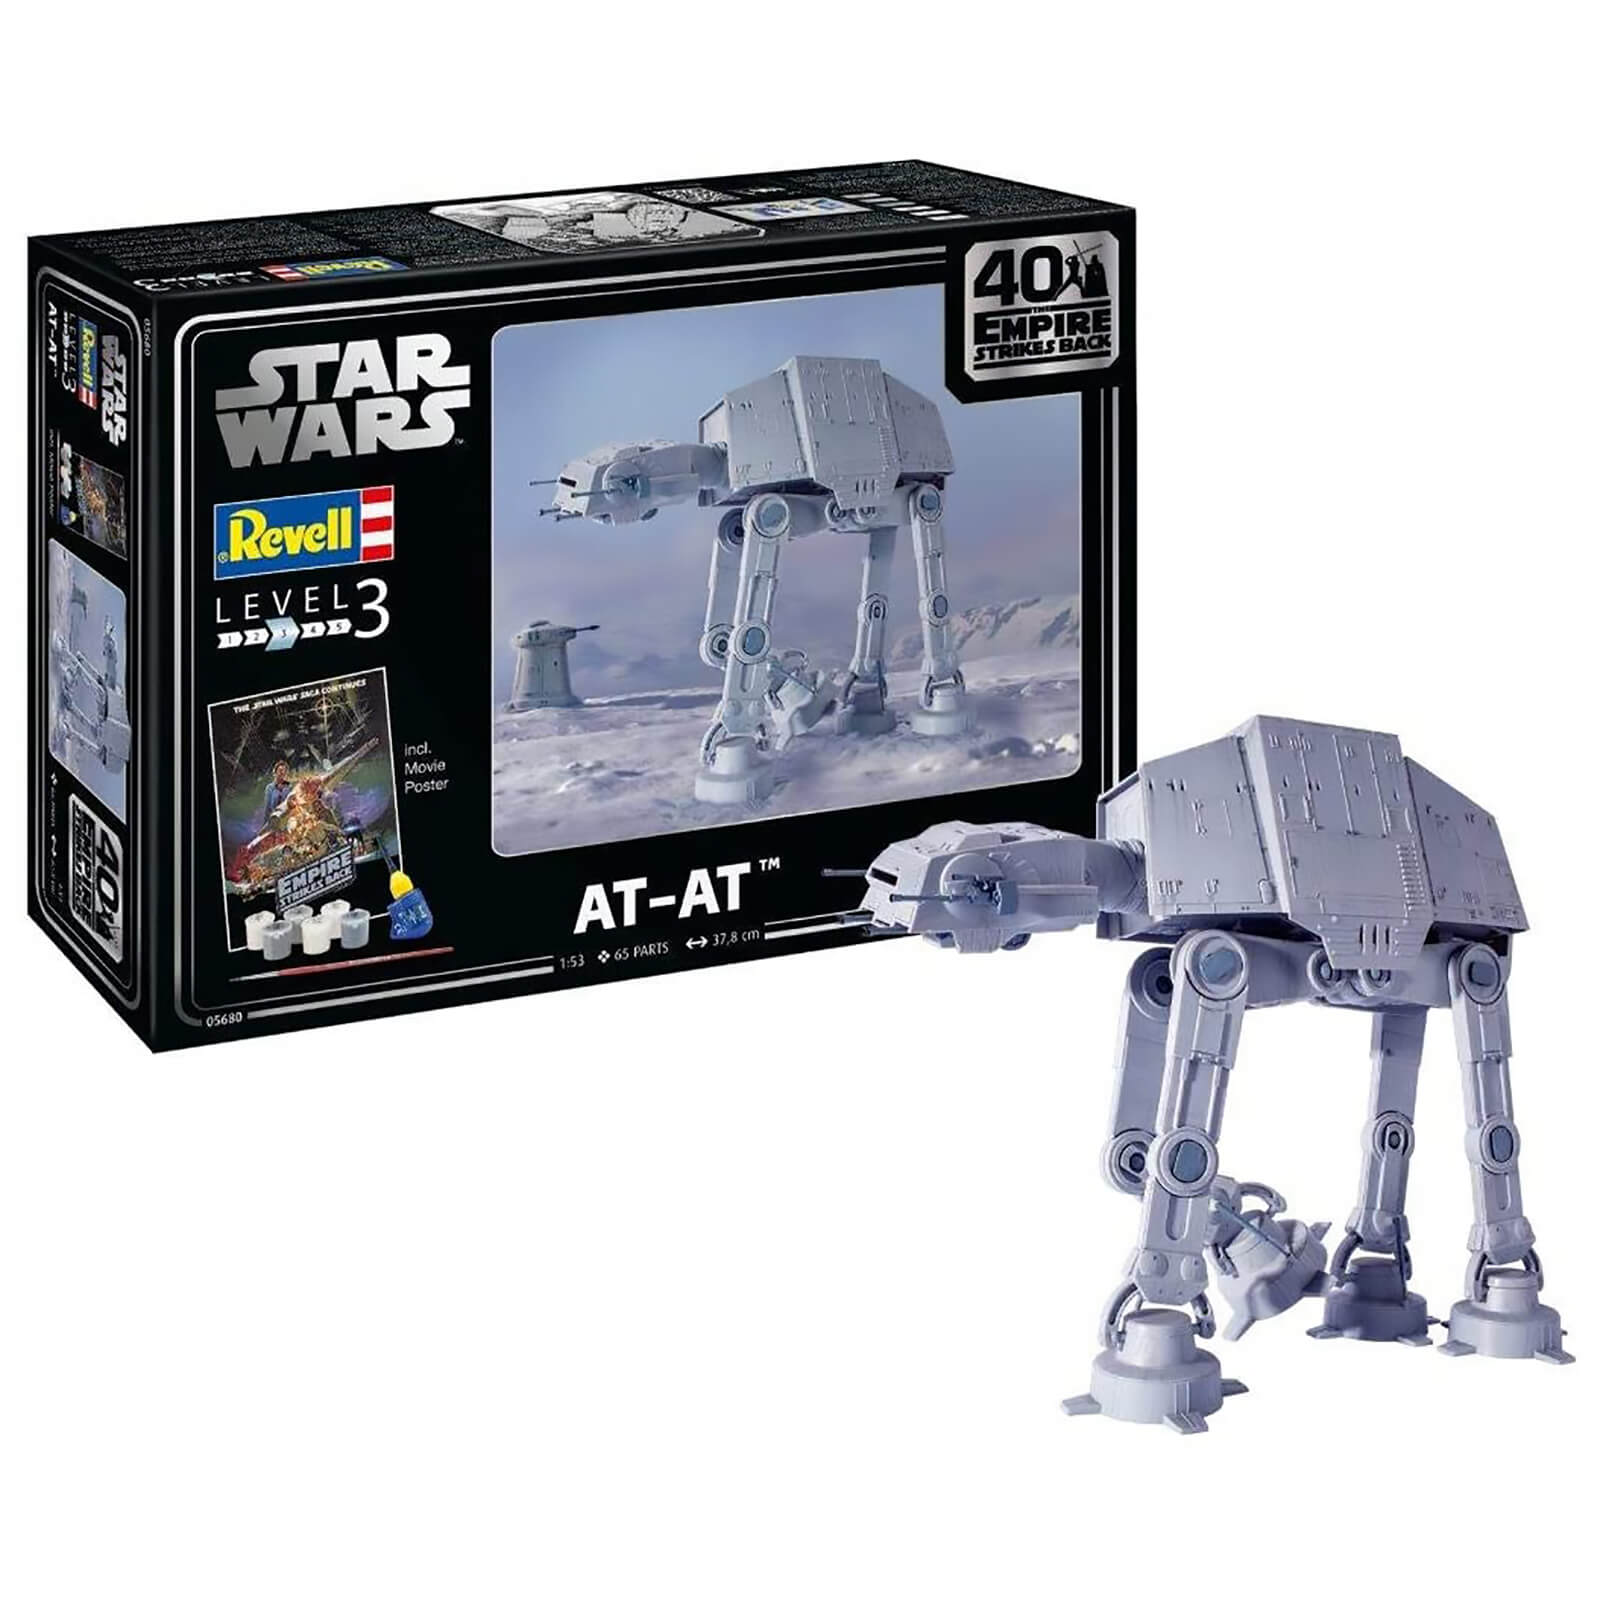 Revell Gift Set - AT-AT (The Empire Strikes Back 40th Anniversary) Model (Scale 1:53)